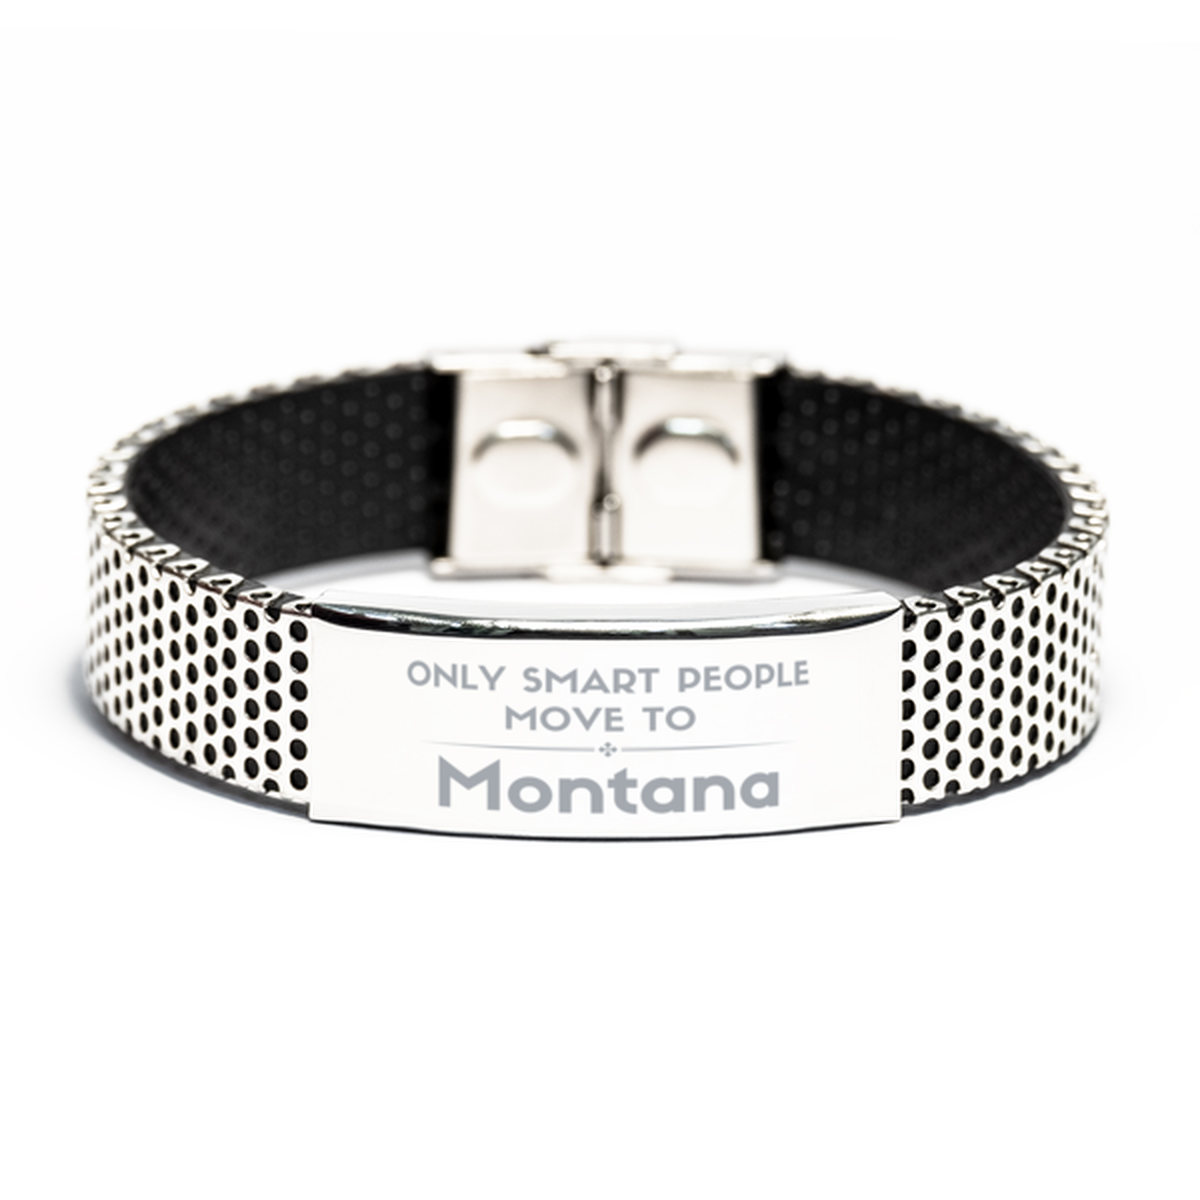 Only smart people move to Montana Stainless Steel Bracelet, Gag Gifts For Montana, Move to Montana Gifts for Friends Coworker Funny Saying Quote